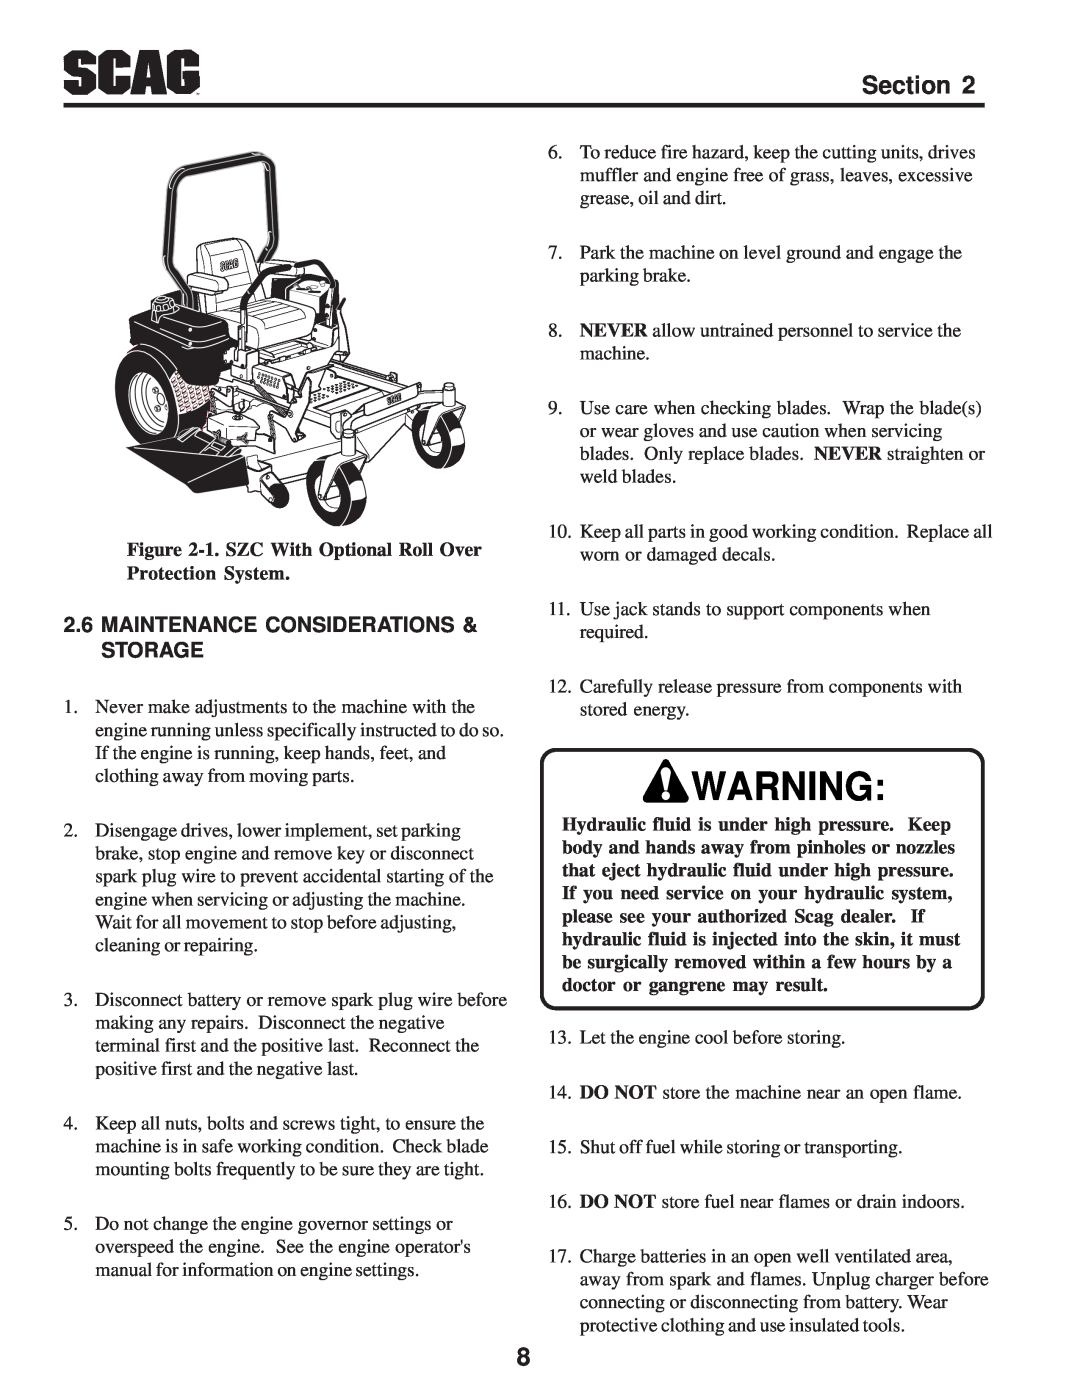 Scag Power Equipment manual Maintenance Considerations & Storage, 1. SZC With Optional Roll Over Protection System 